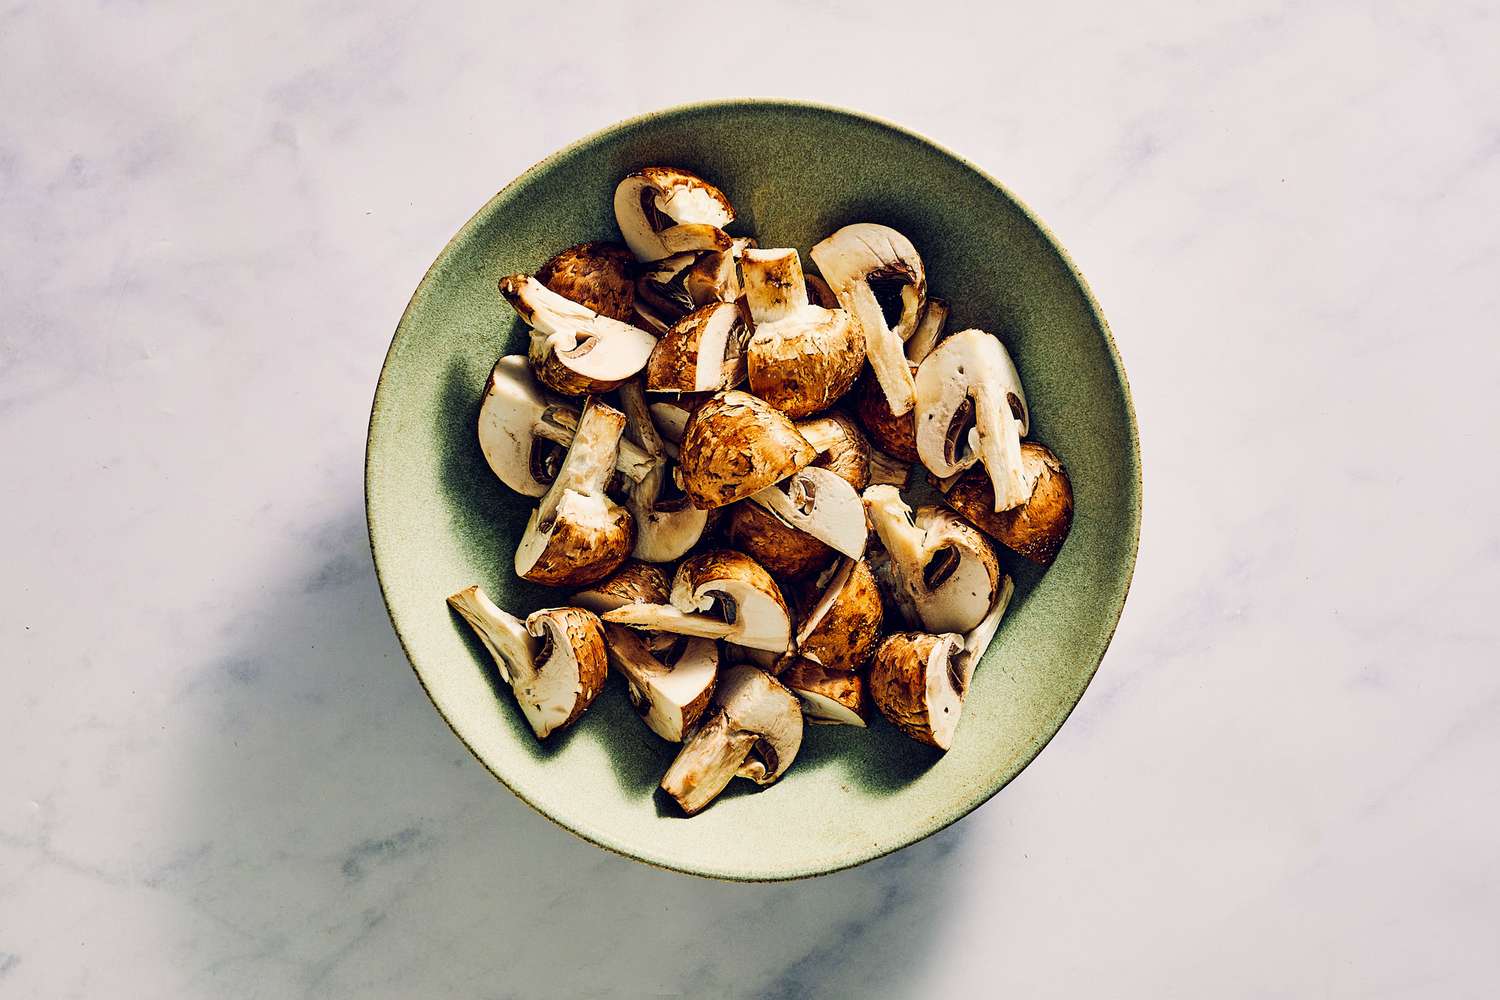 A bowl of cremini mushrooms tossed in oil and seasoned with salt